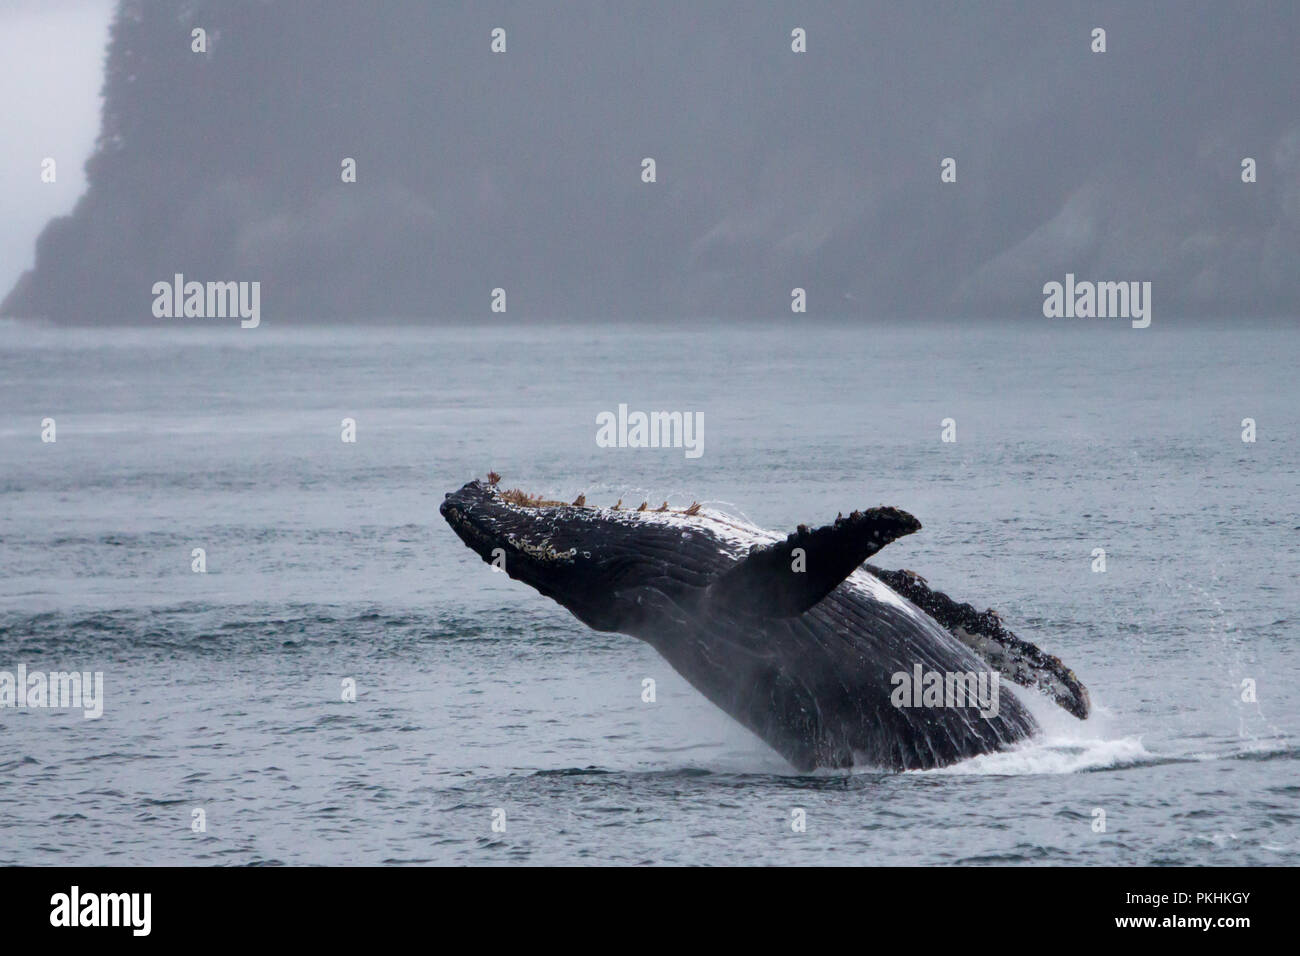 A humpback whale breaches high into the air in Cross sound near the Inian islands in Southeast Alaska, USA Stock Photo